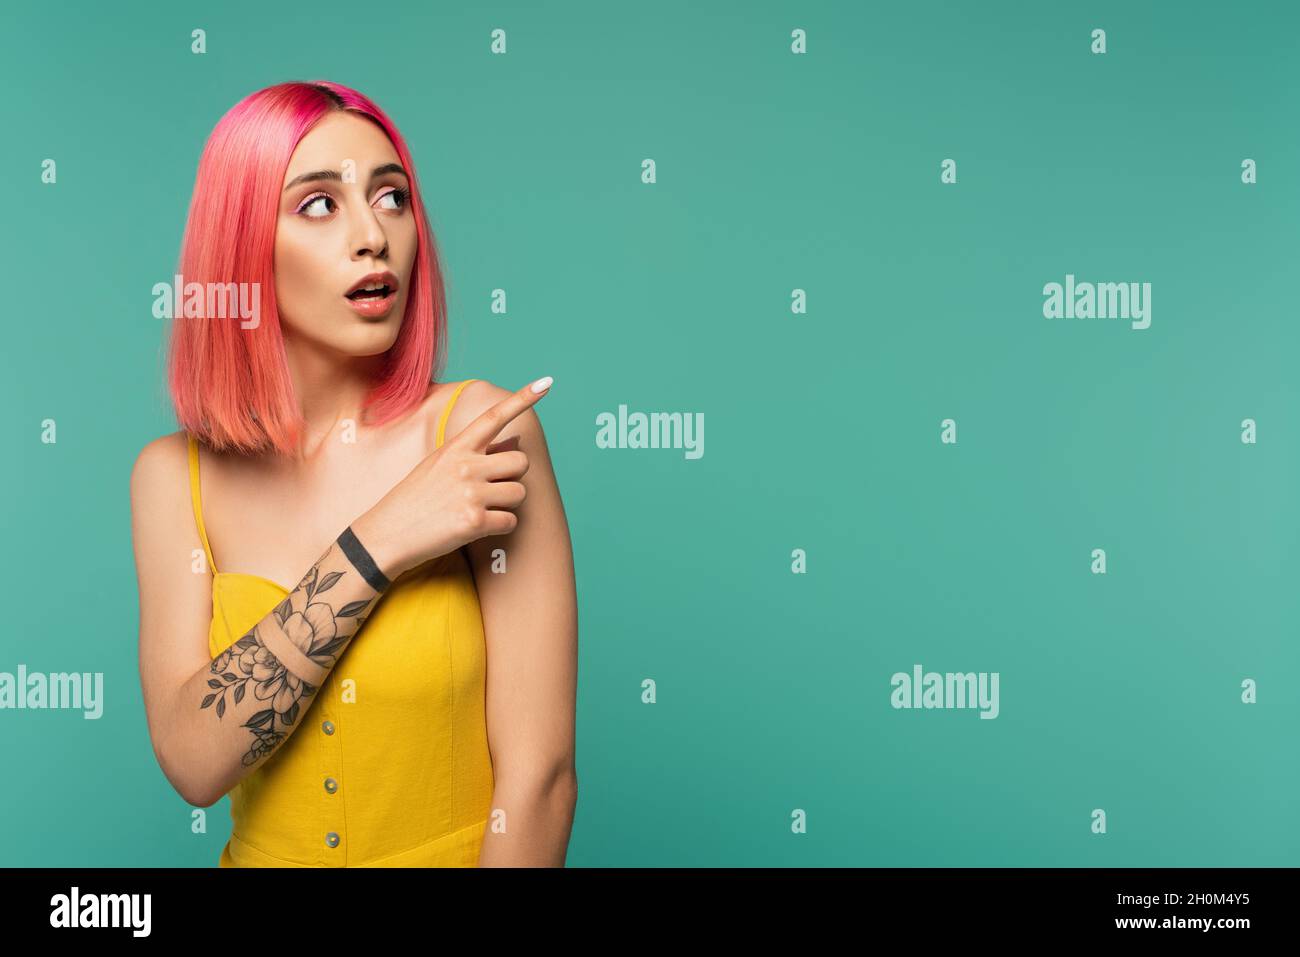 amazed young woman with pink dyed hair poising with finger isolated on turquoise Stock Photo